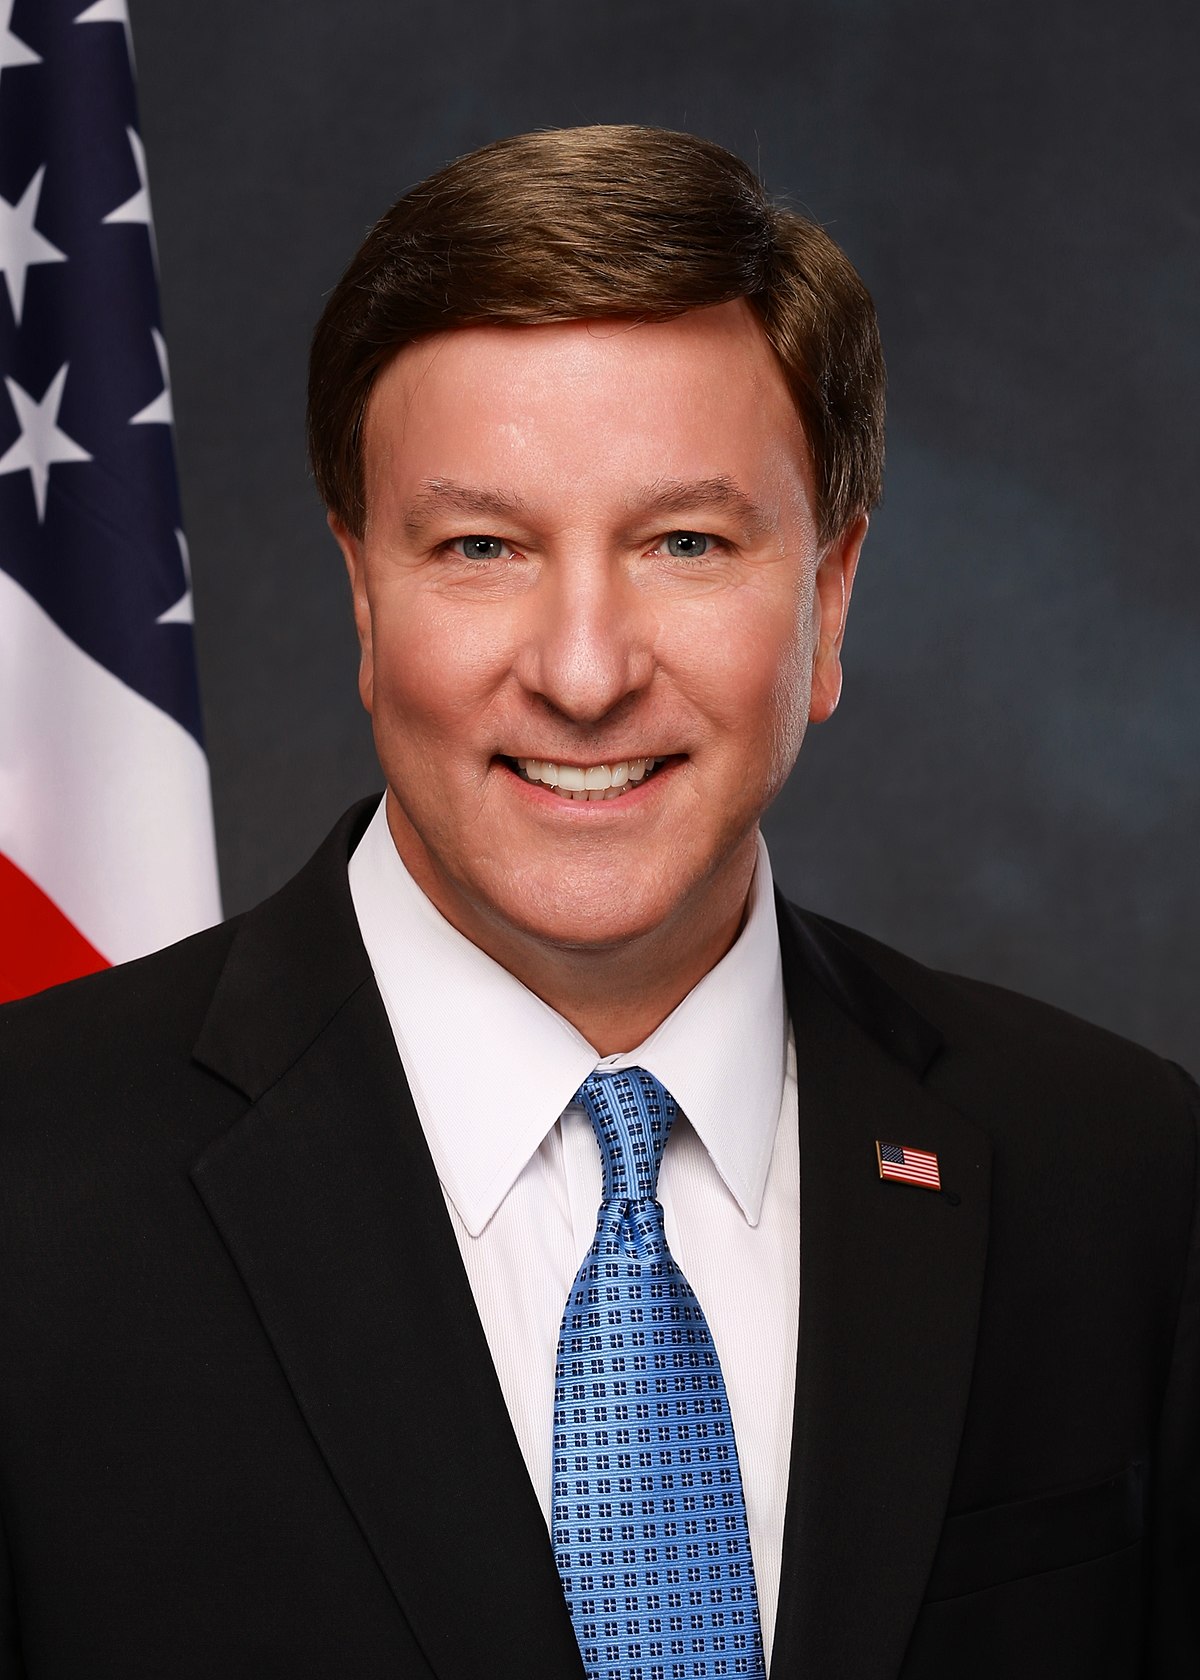 File:Mike Rogers official photo.jpg - Wikimedia Commons.